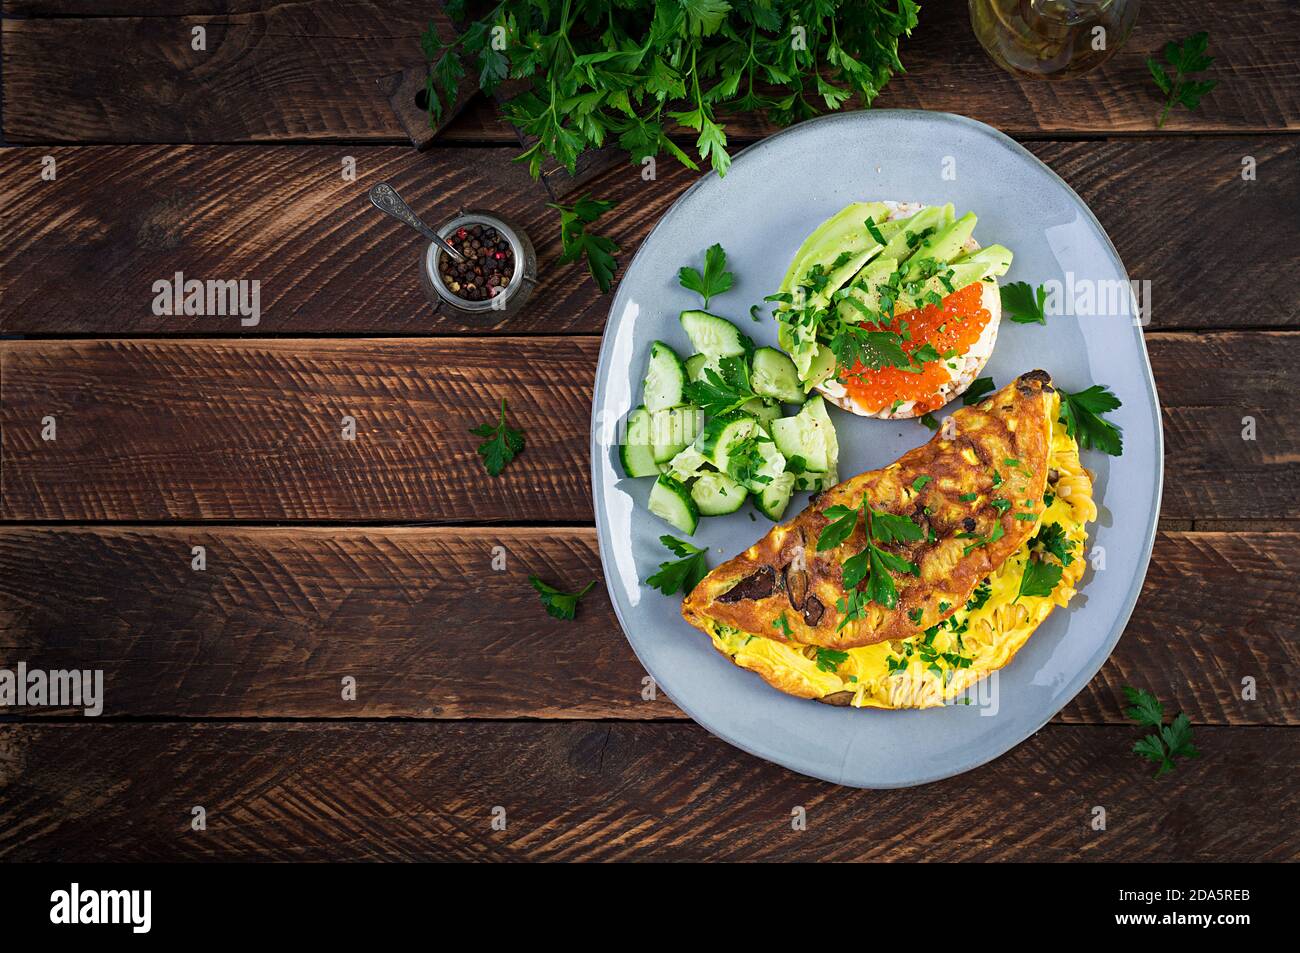 Omelette with forest mushroom, fusilli pasta and sandwich wich red cavier, avocado on plate.  Frittata - italian omelet. Top view, overhead, copy spac Stock Photo